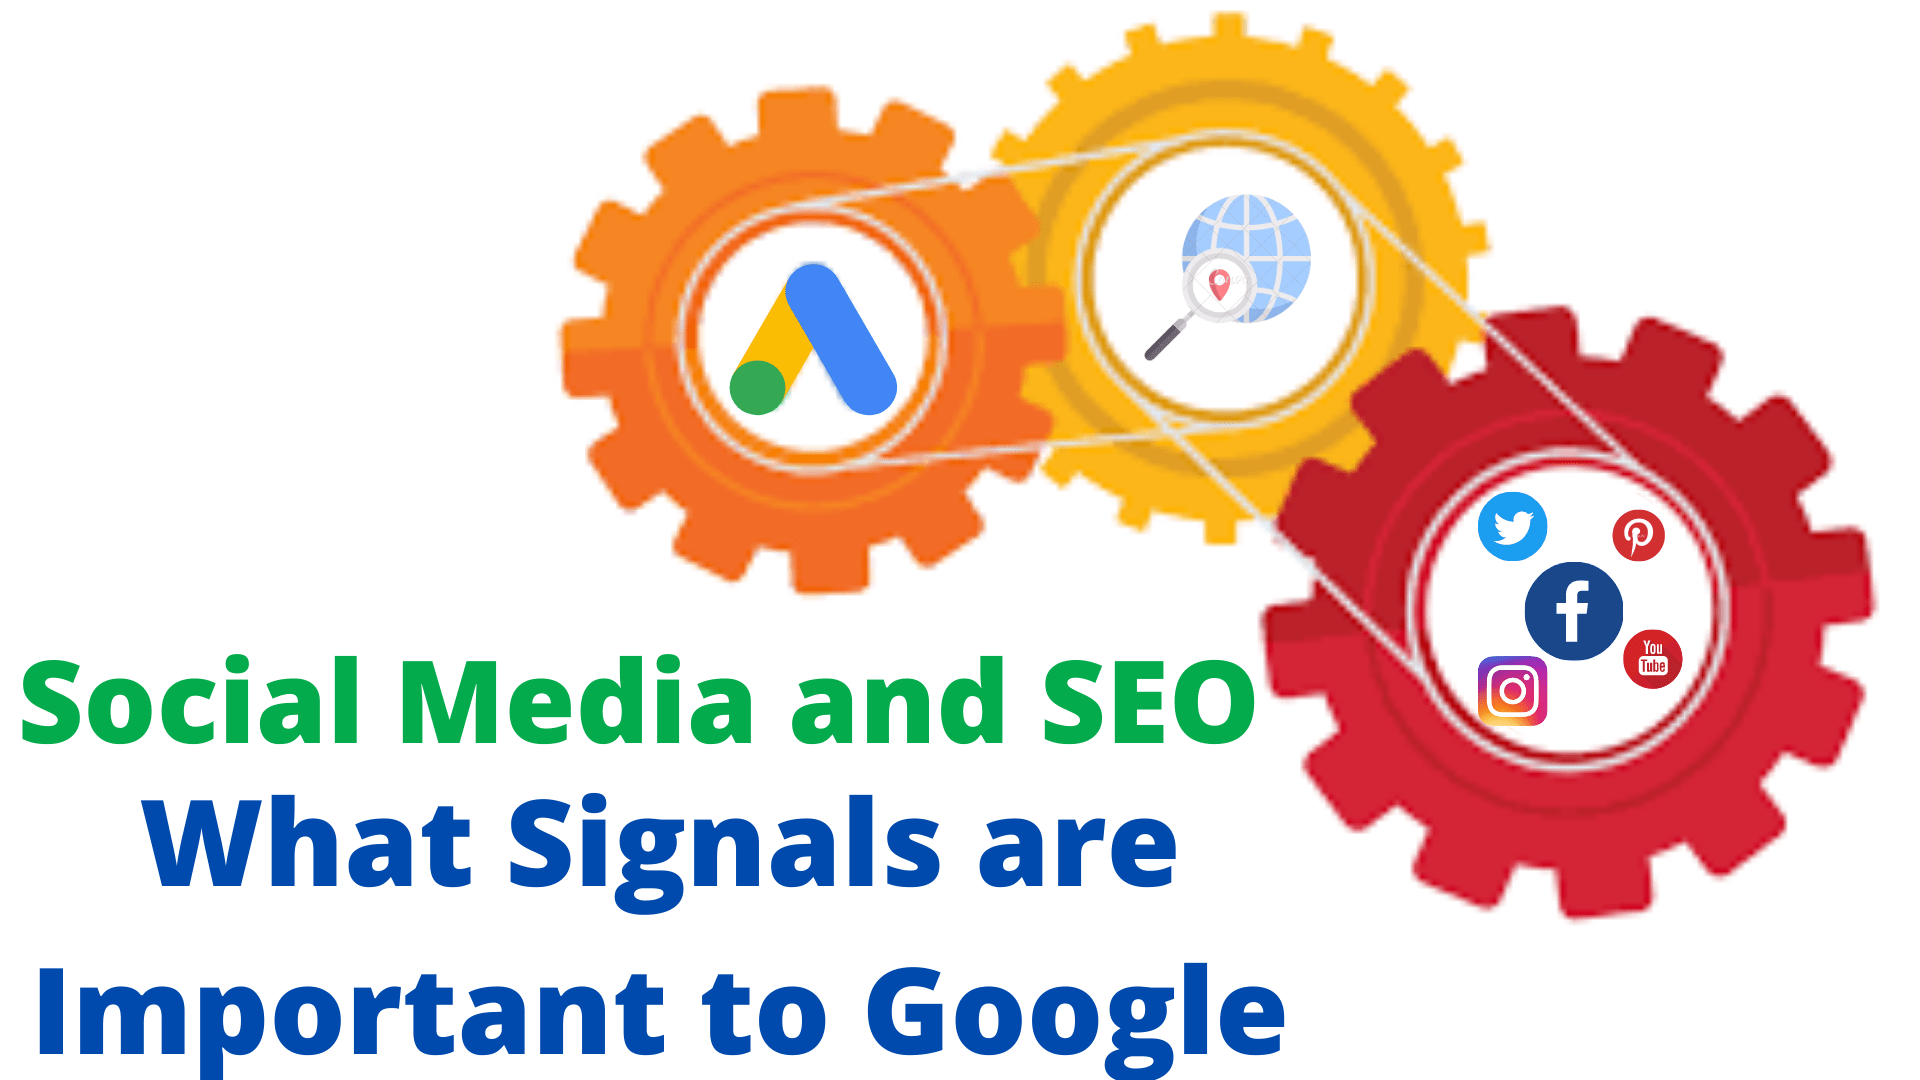 Social Media and SEO: What Signals are Important to Google